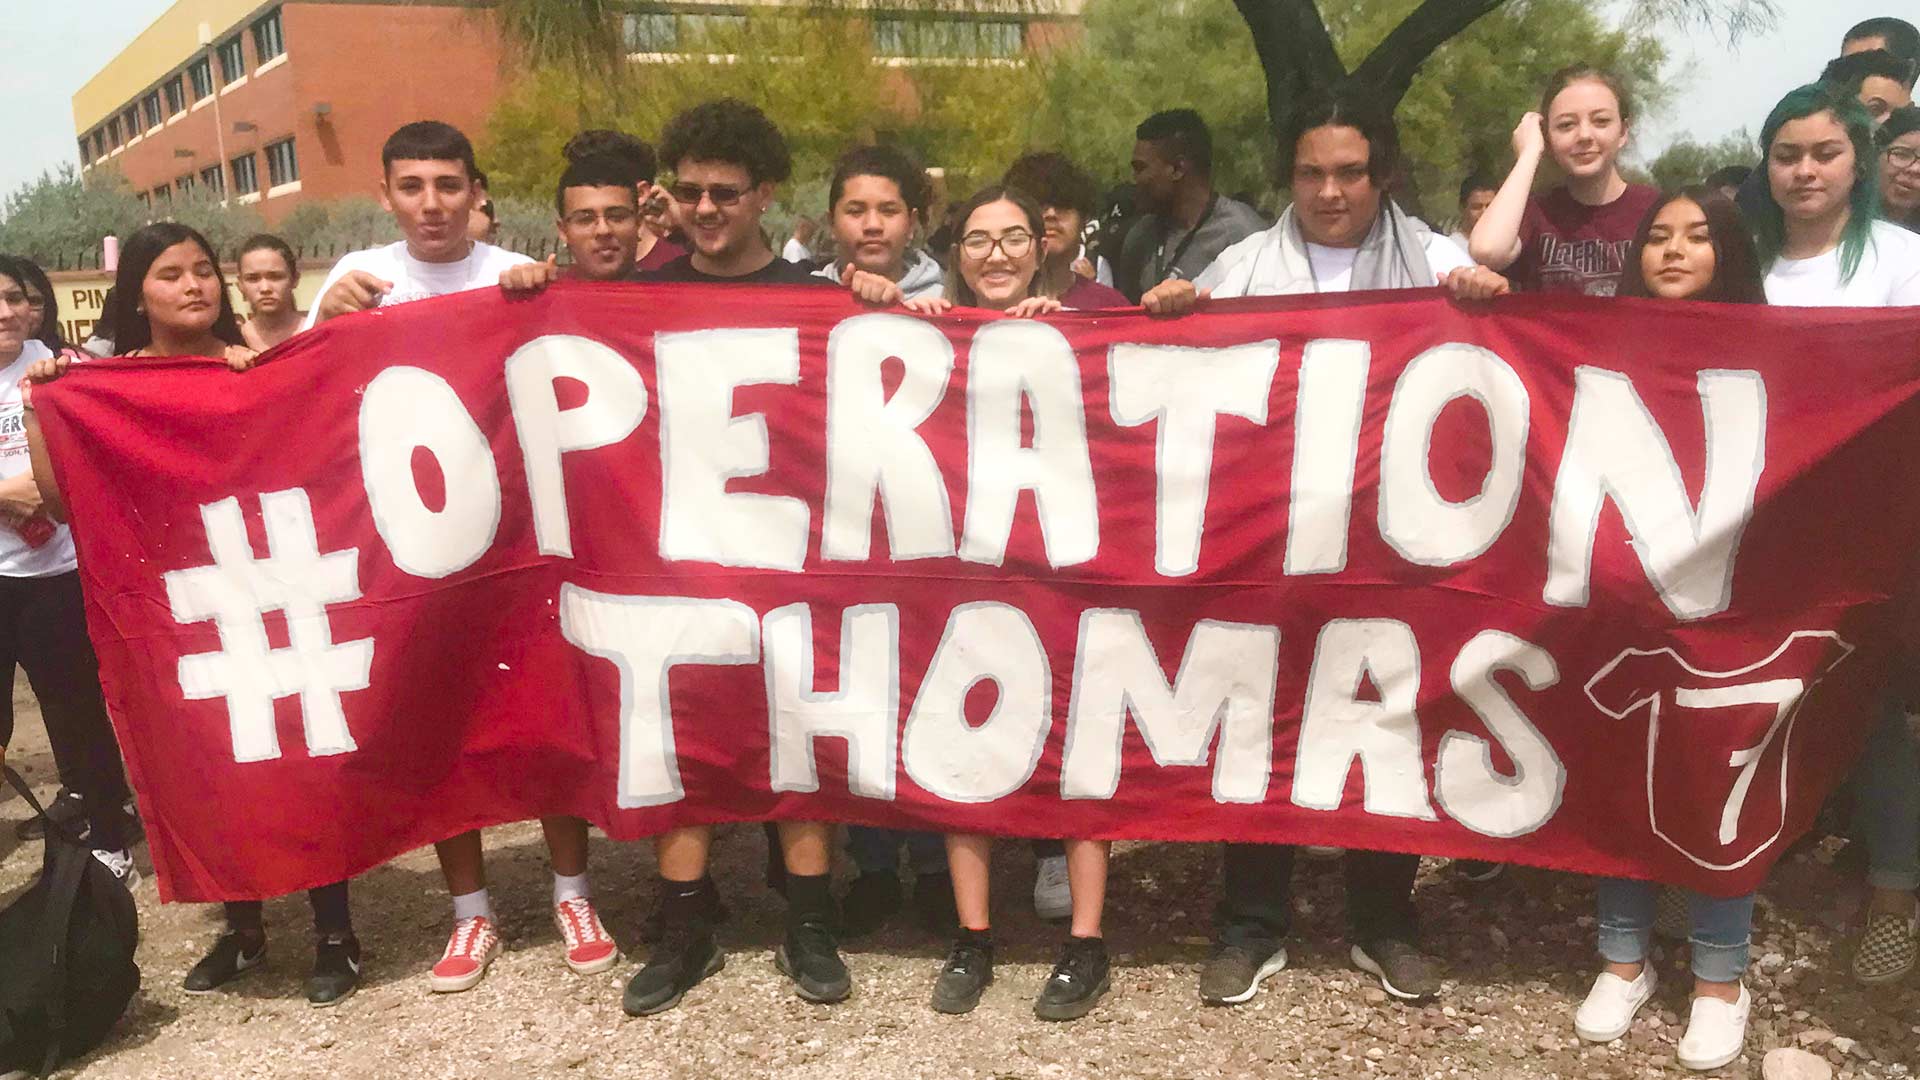 Desert View High School students protest the arrest of their classmate, 18-year-old Thomas Torres.  